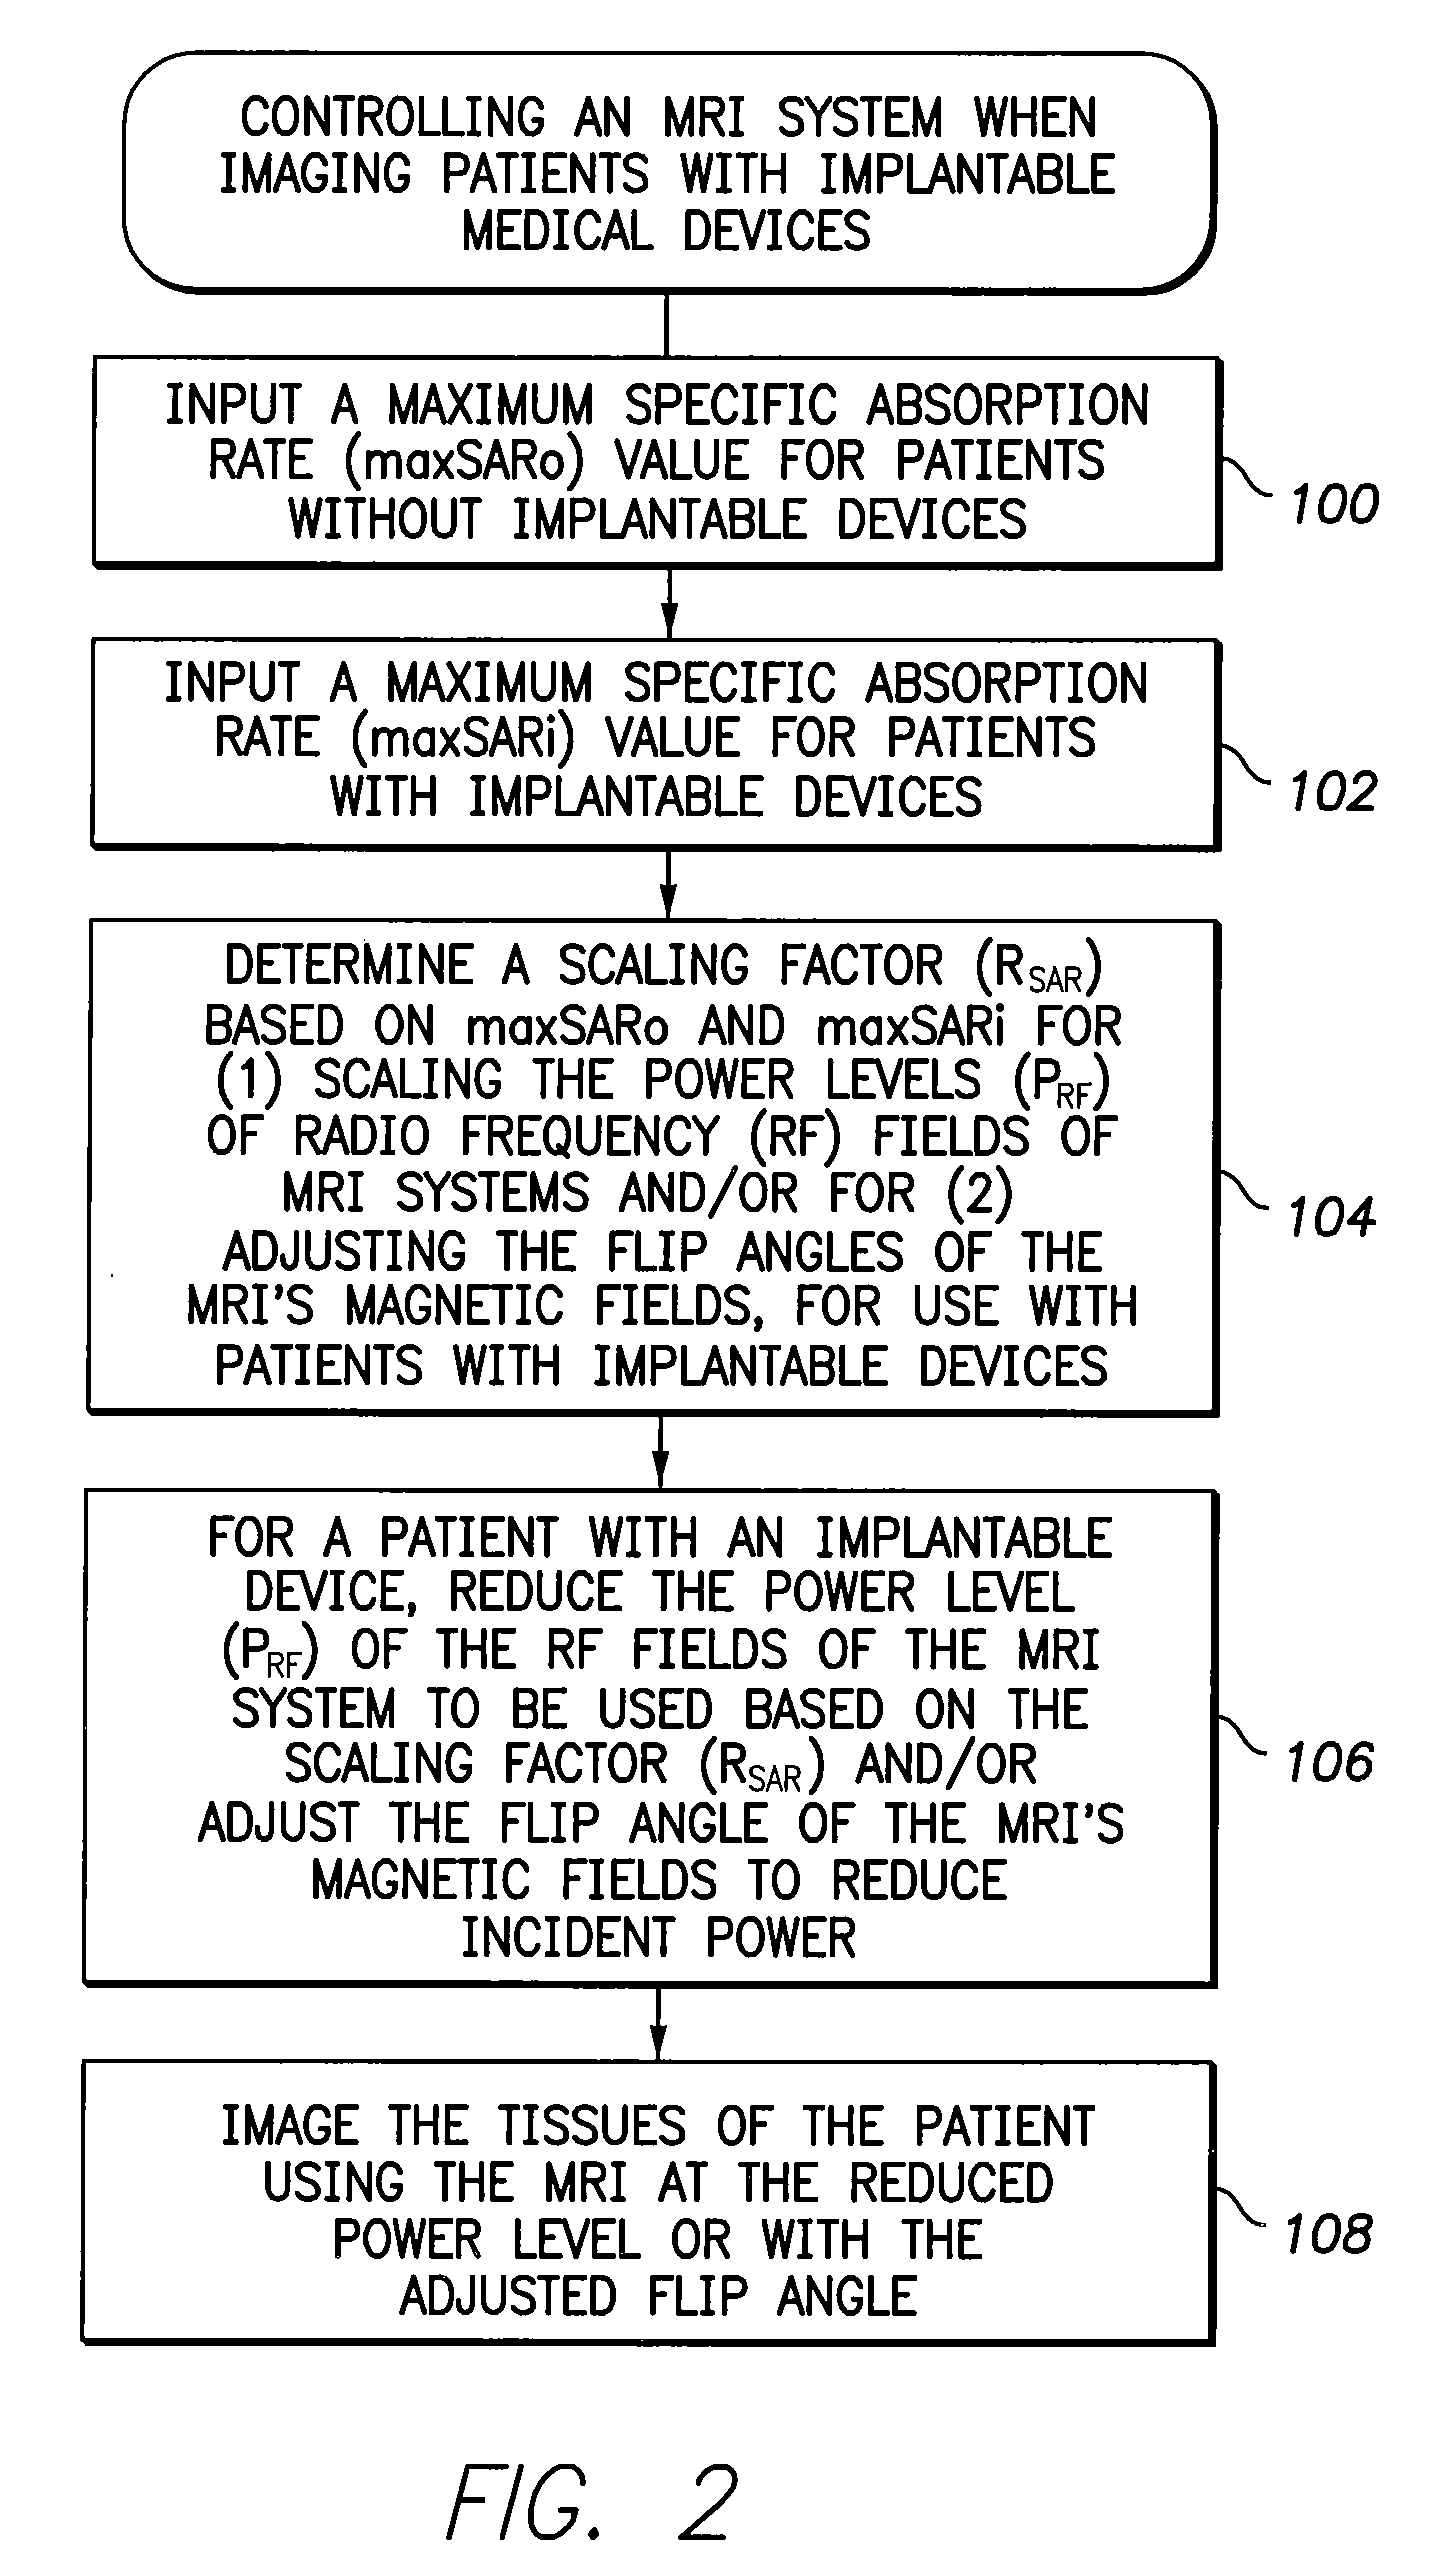 Systems and Methods for Reducing RF Power or Adjusting Flip Angles During an MRI for Patients with Implantable Medical Devices